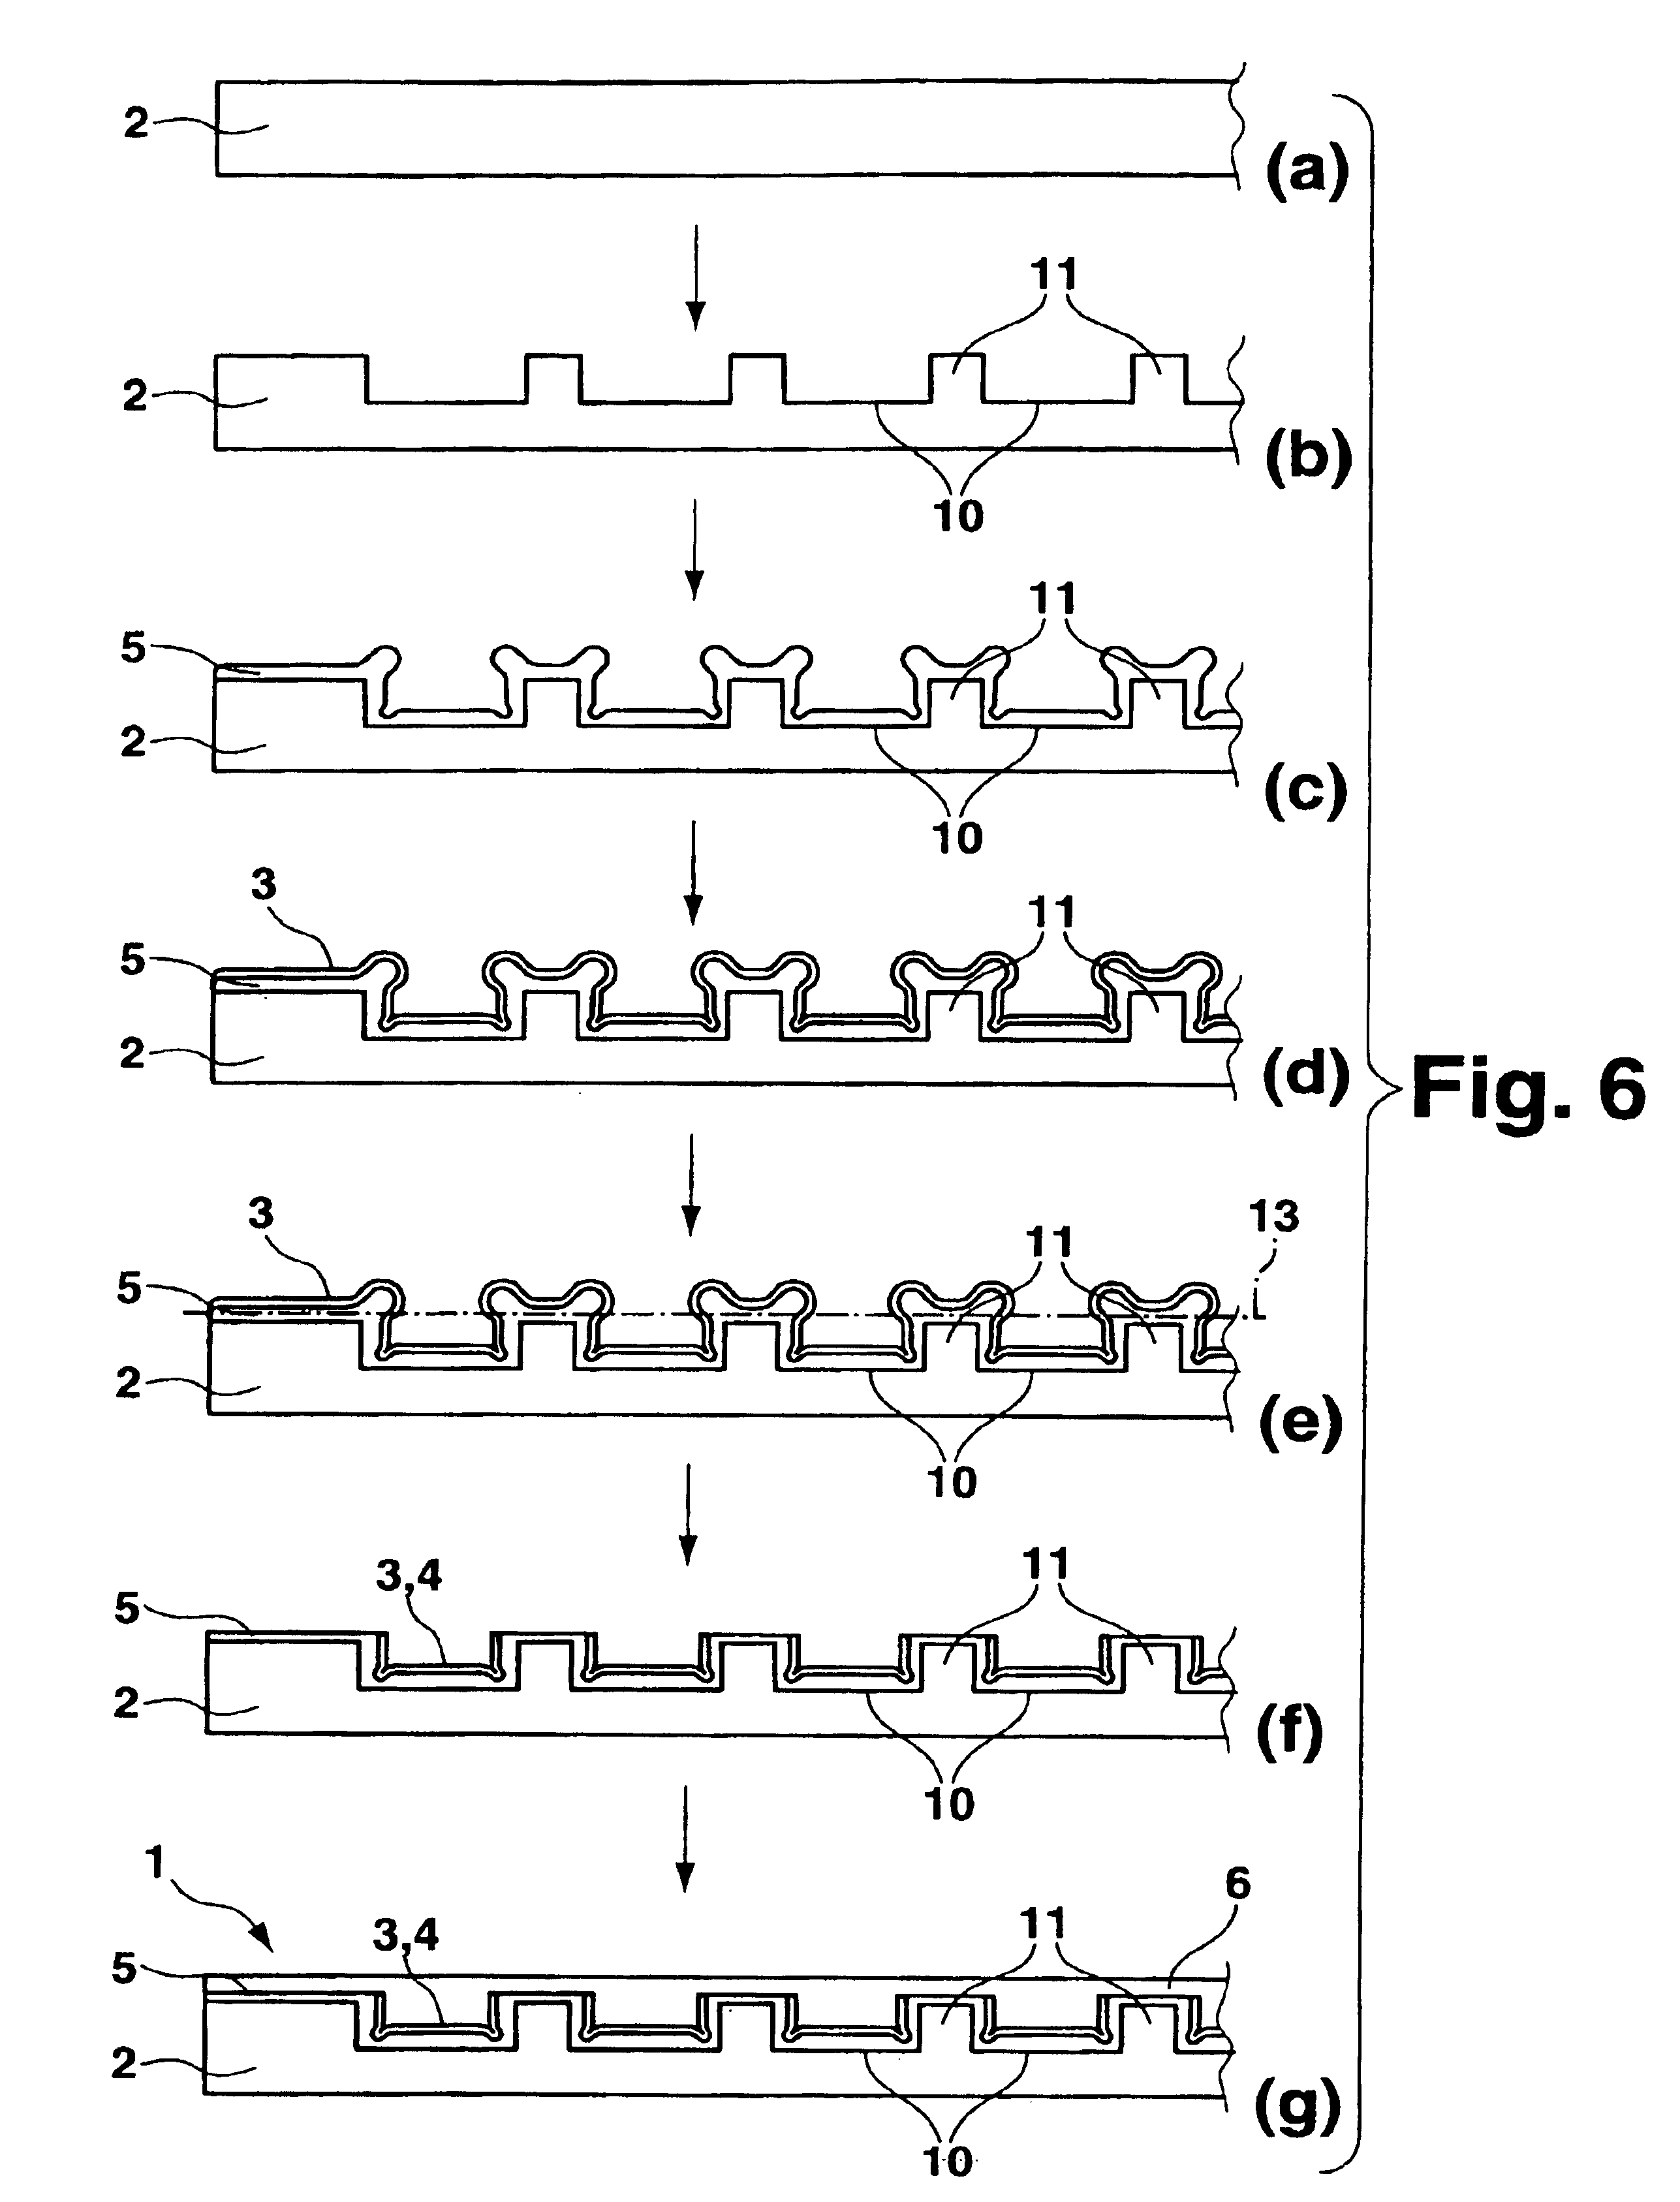 Method for producing a resistive heating element